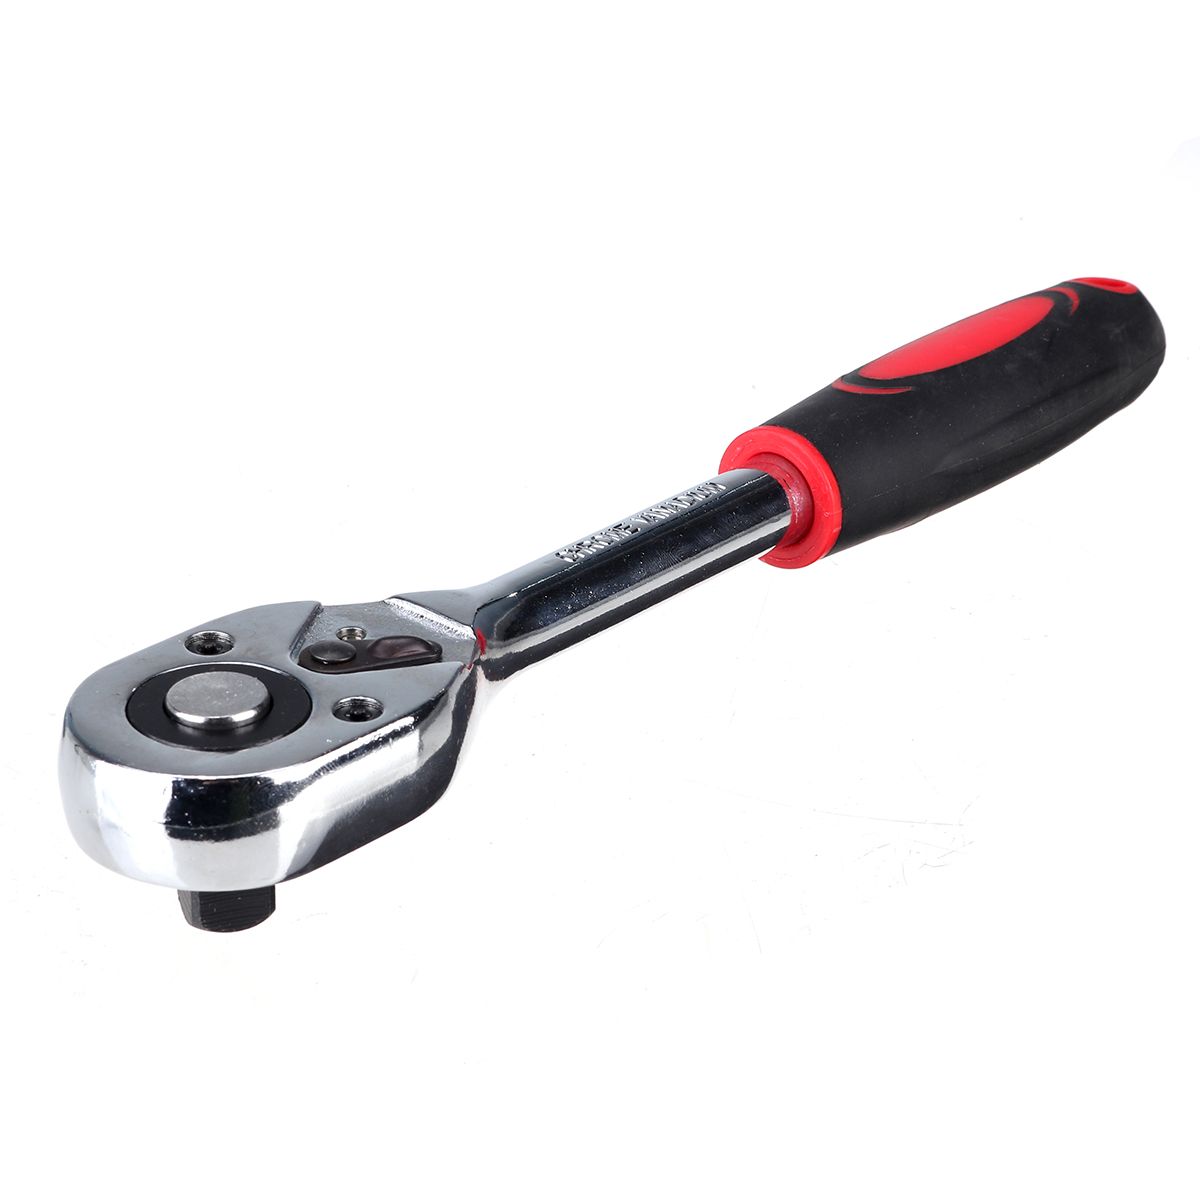 12-Inch-Handle-Drive-Socket-Tool-Ratchet-Wrench-Spanner-Quick-Fast-Release-24-Teeth-1399780